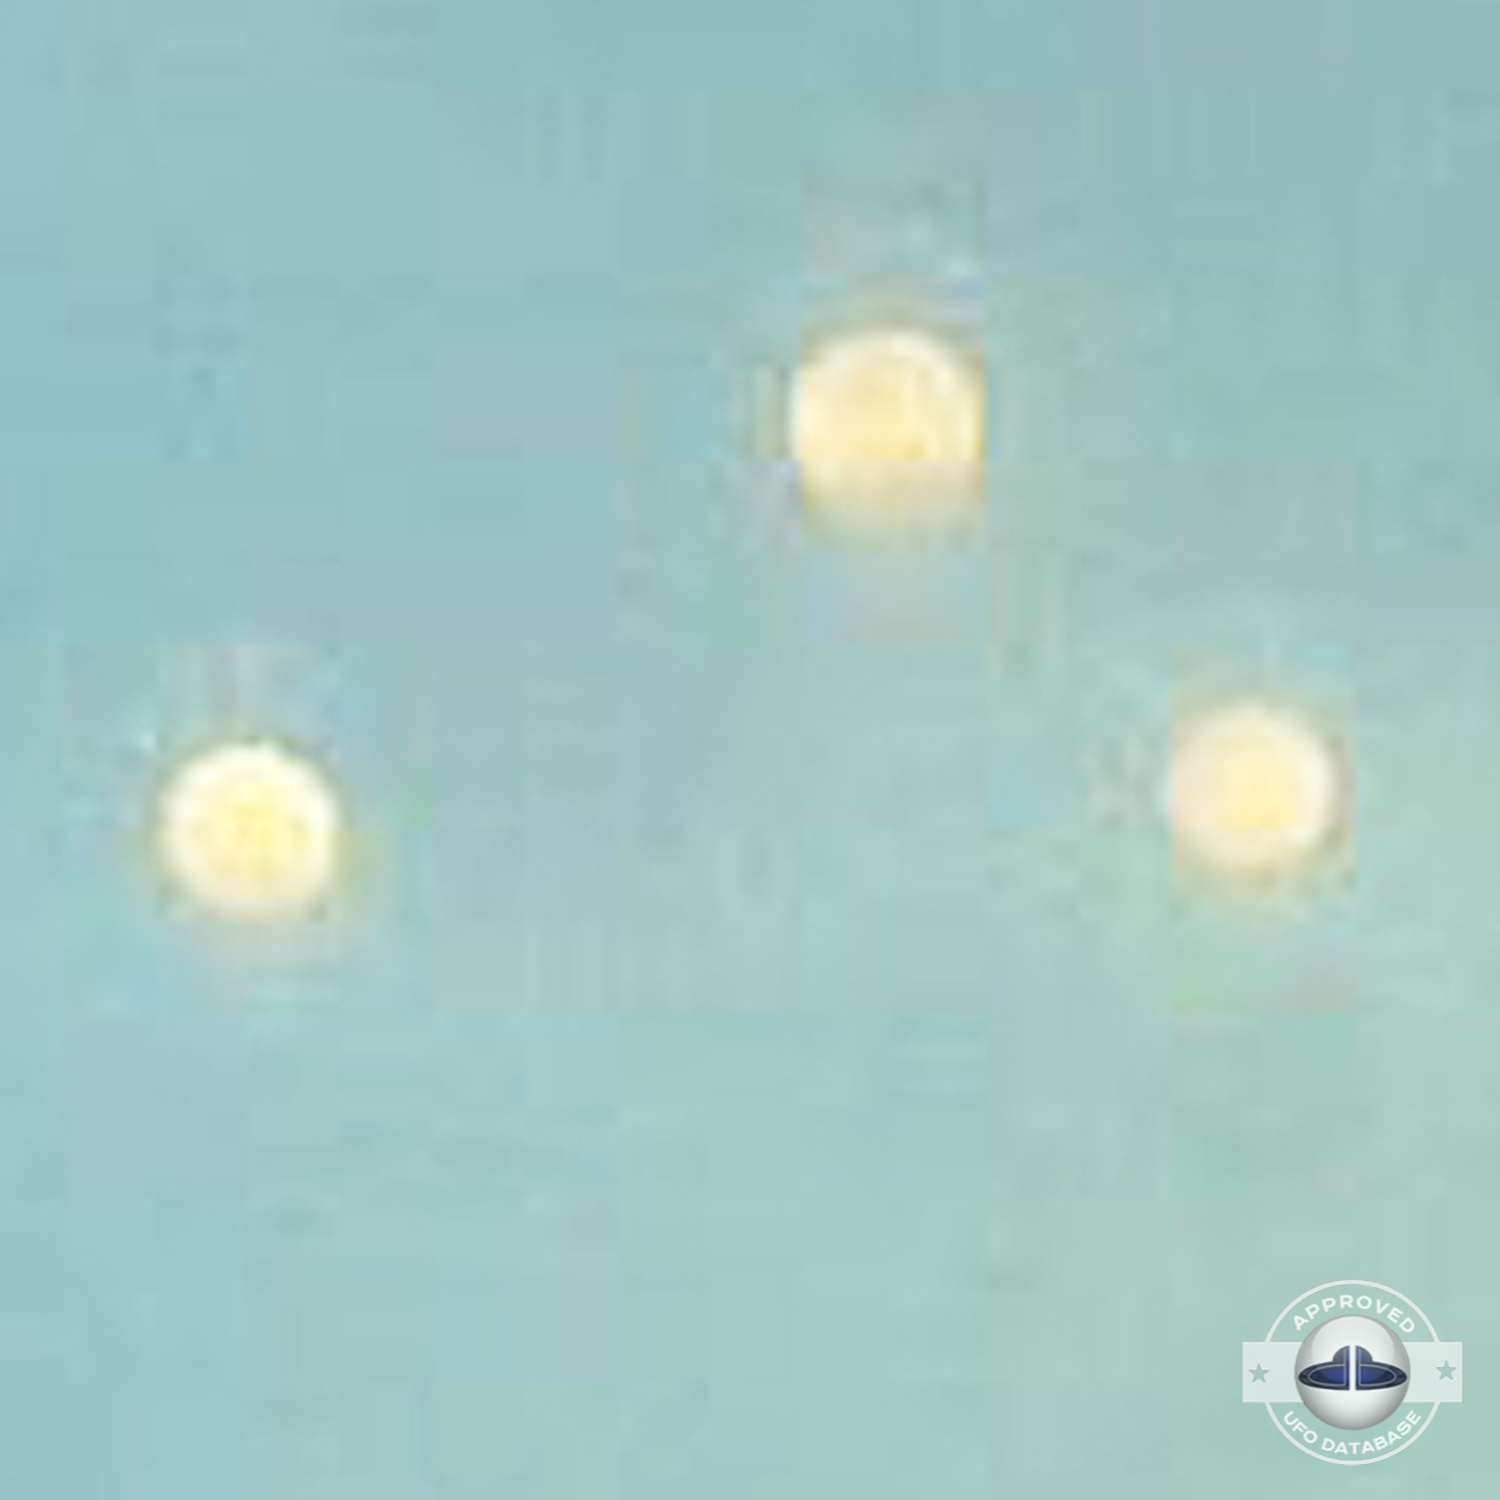 Citizens of Leshan saw 3 illuminated spherical shaped UFO in the sky UFO Picture #158-4